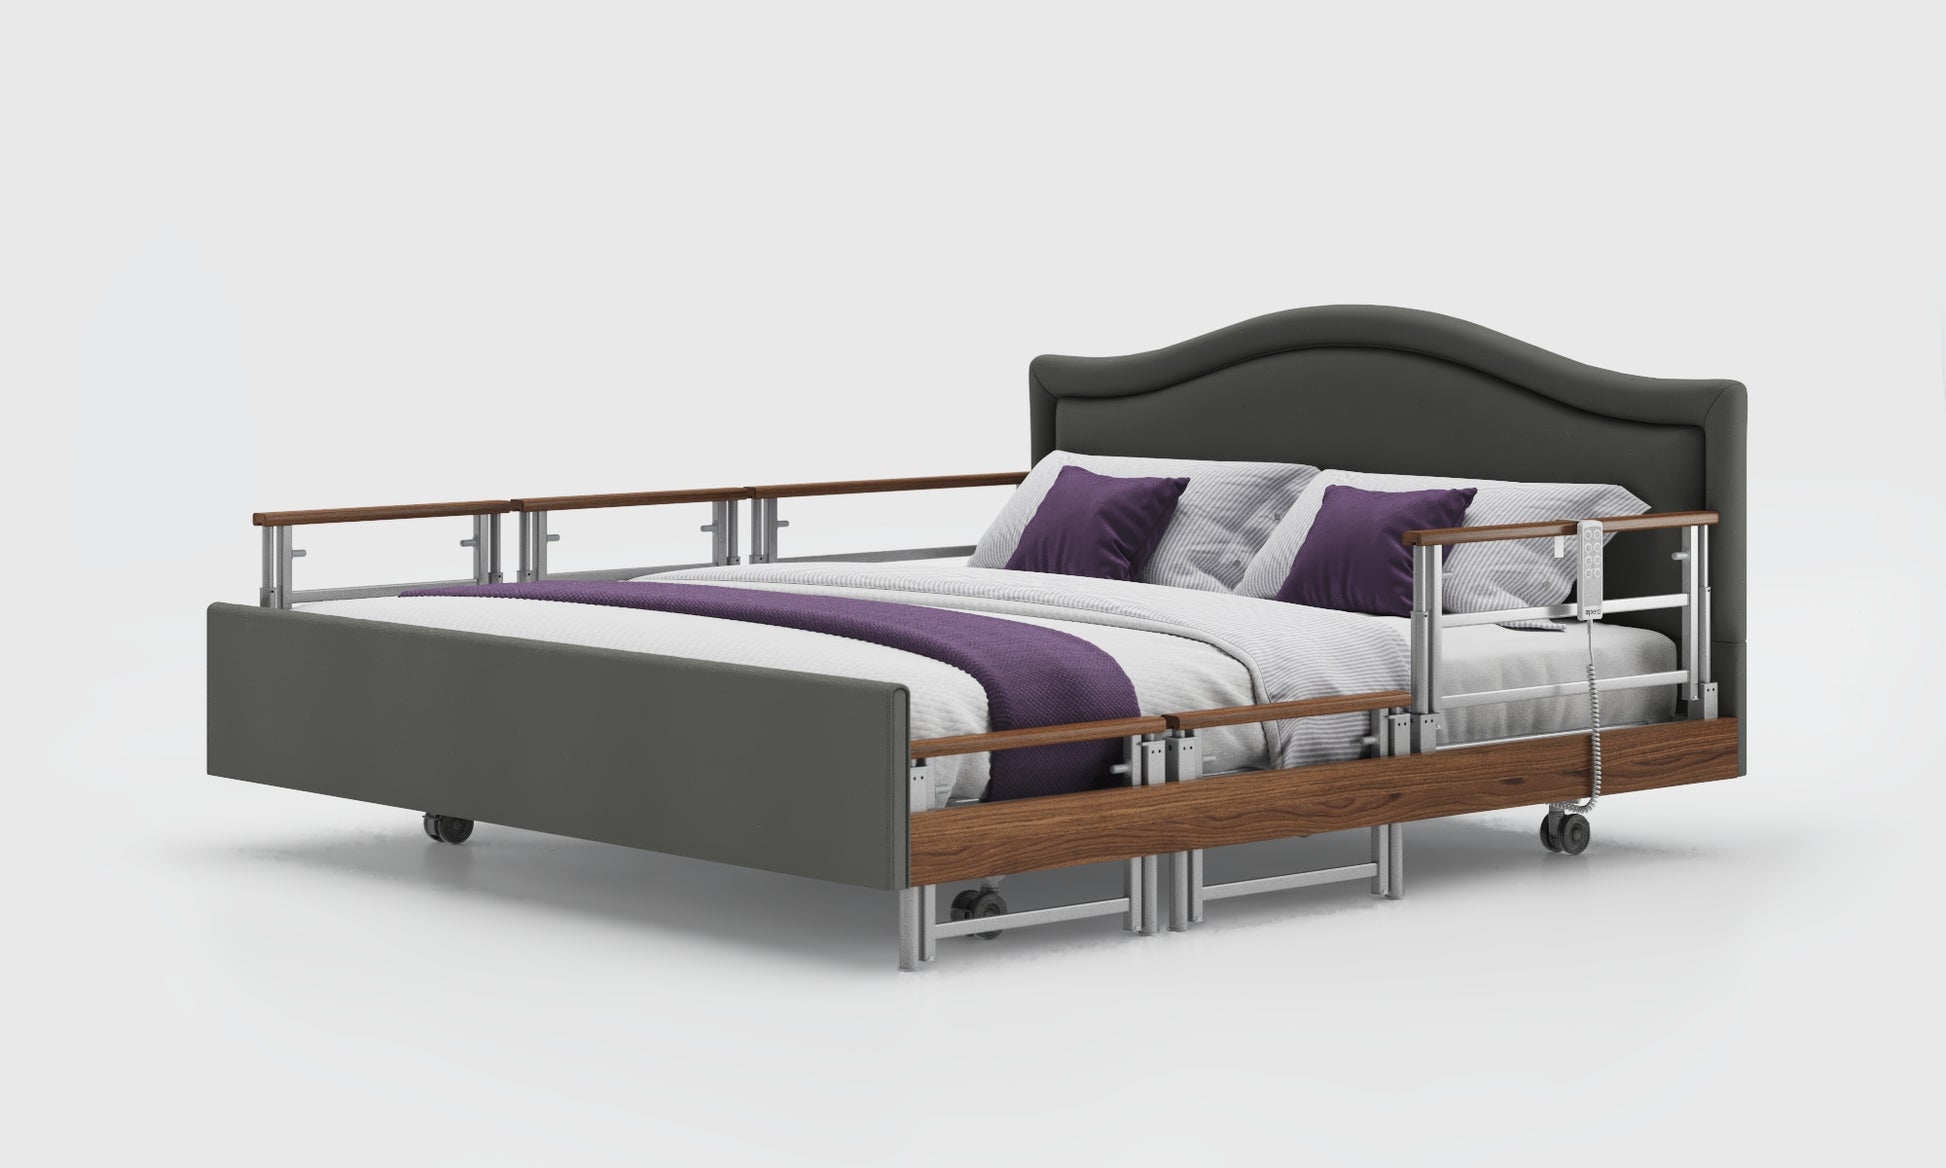 Signature comfort 6ft bed with walnut tri rails and pearl headboard in lichtgrau leather